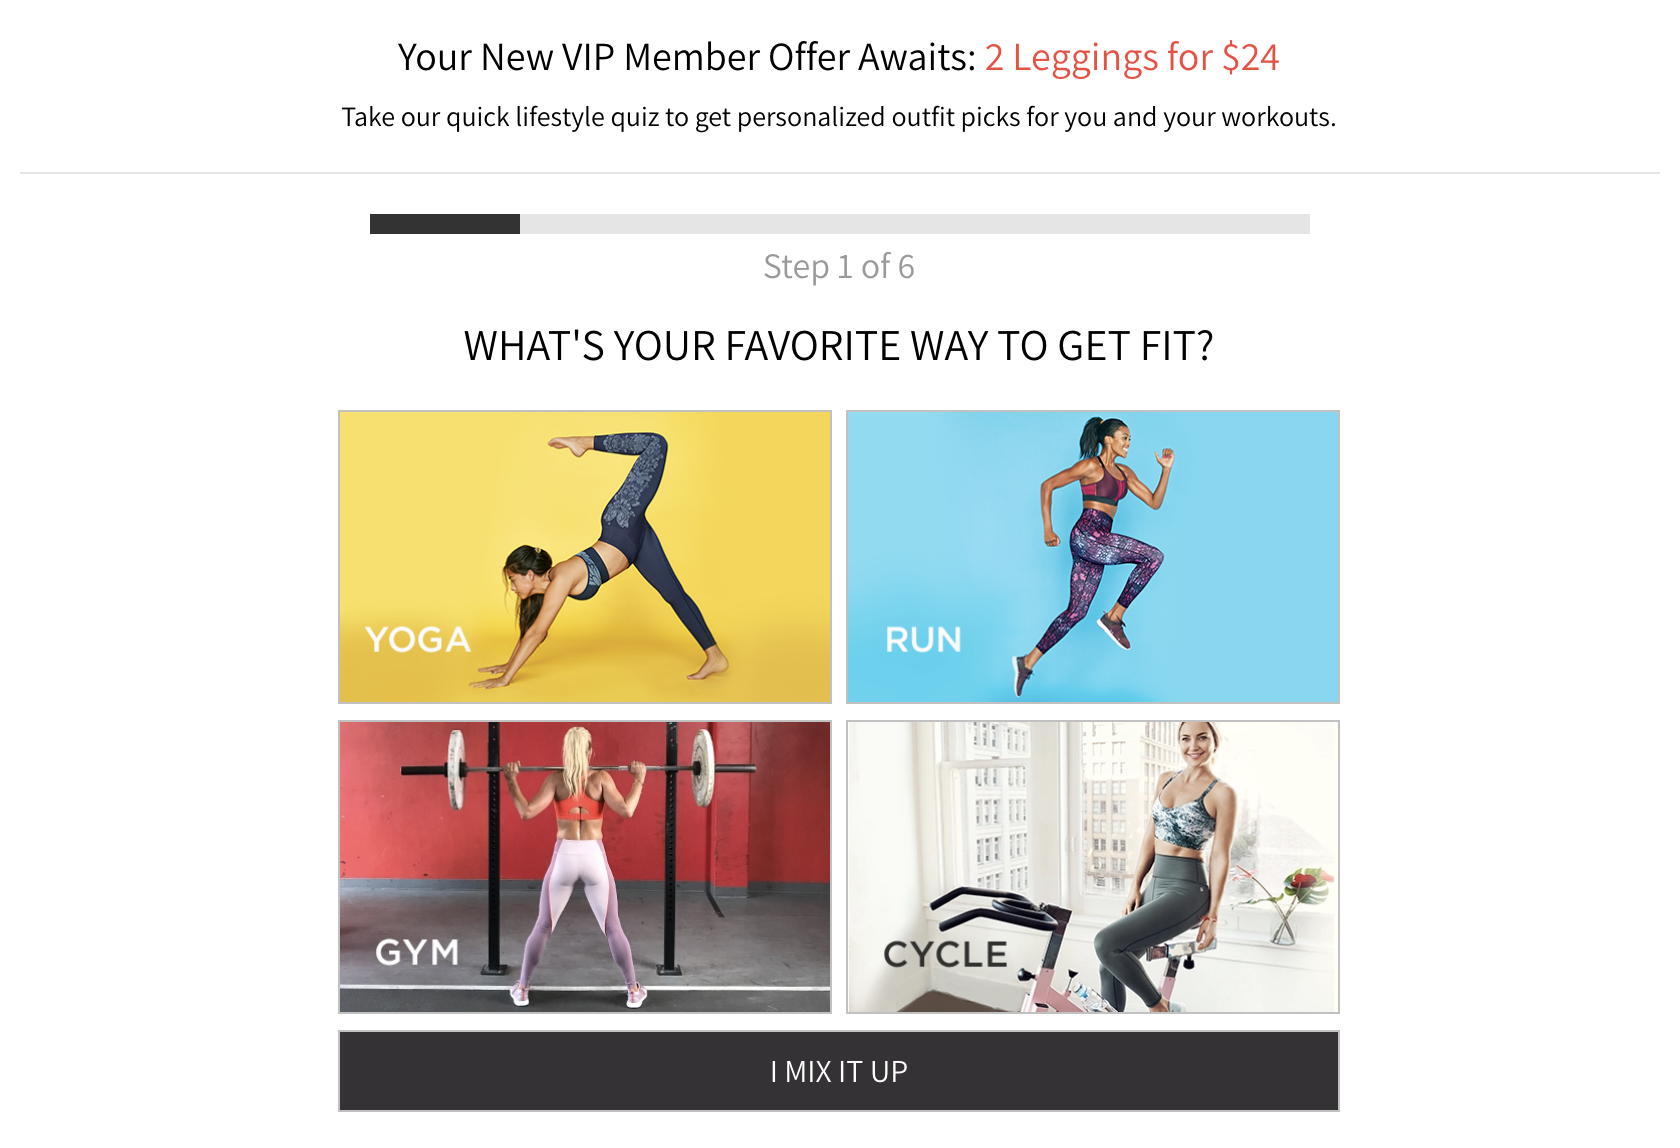 Fabletics offers a VIP membership tailored to customers’ preferences, from their favorite workout activities to styles, to personalize the customer experience, and increase retention. 